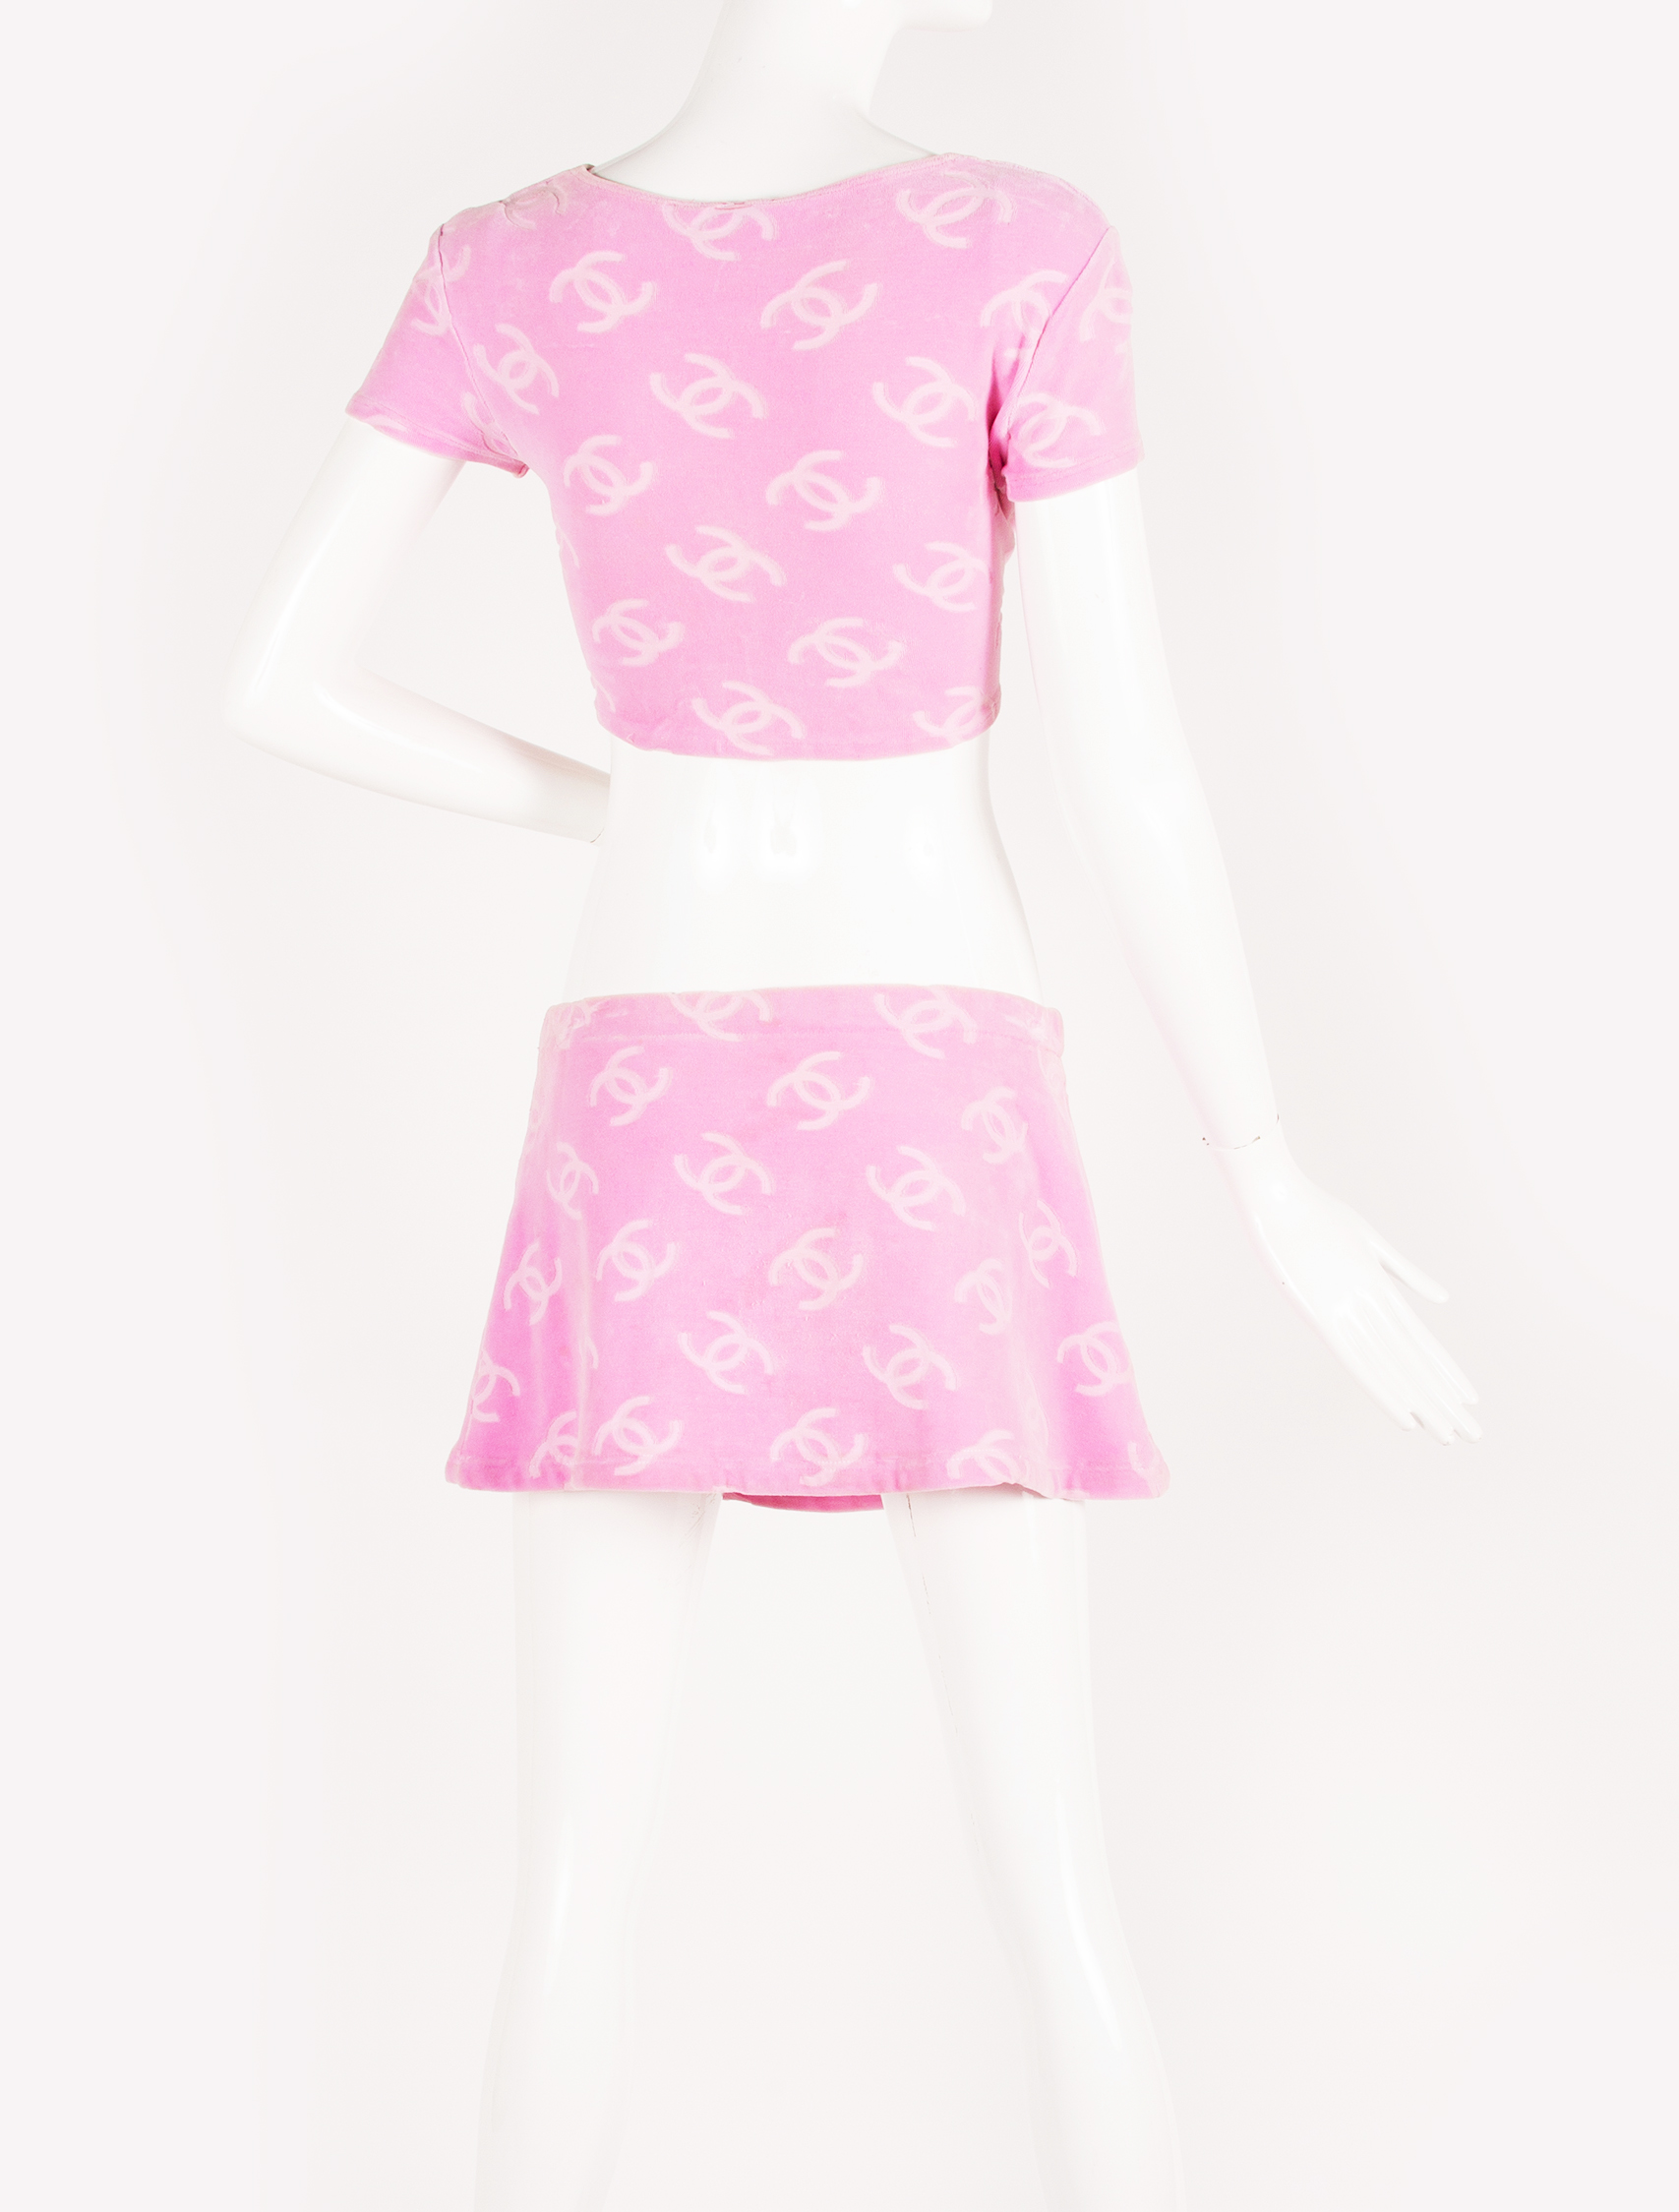 Chanel Crop Top and Short Set - Janet Mandell